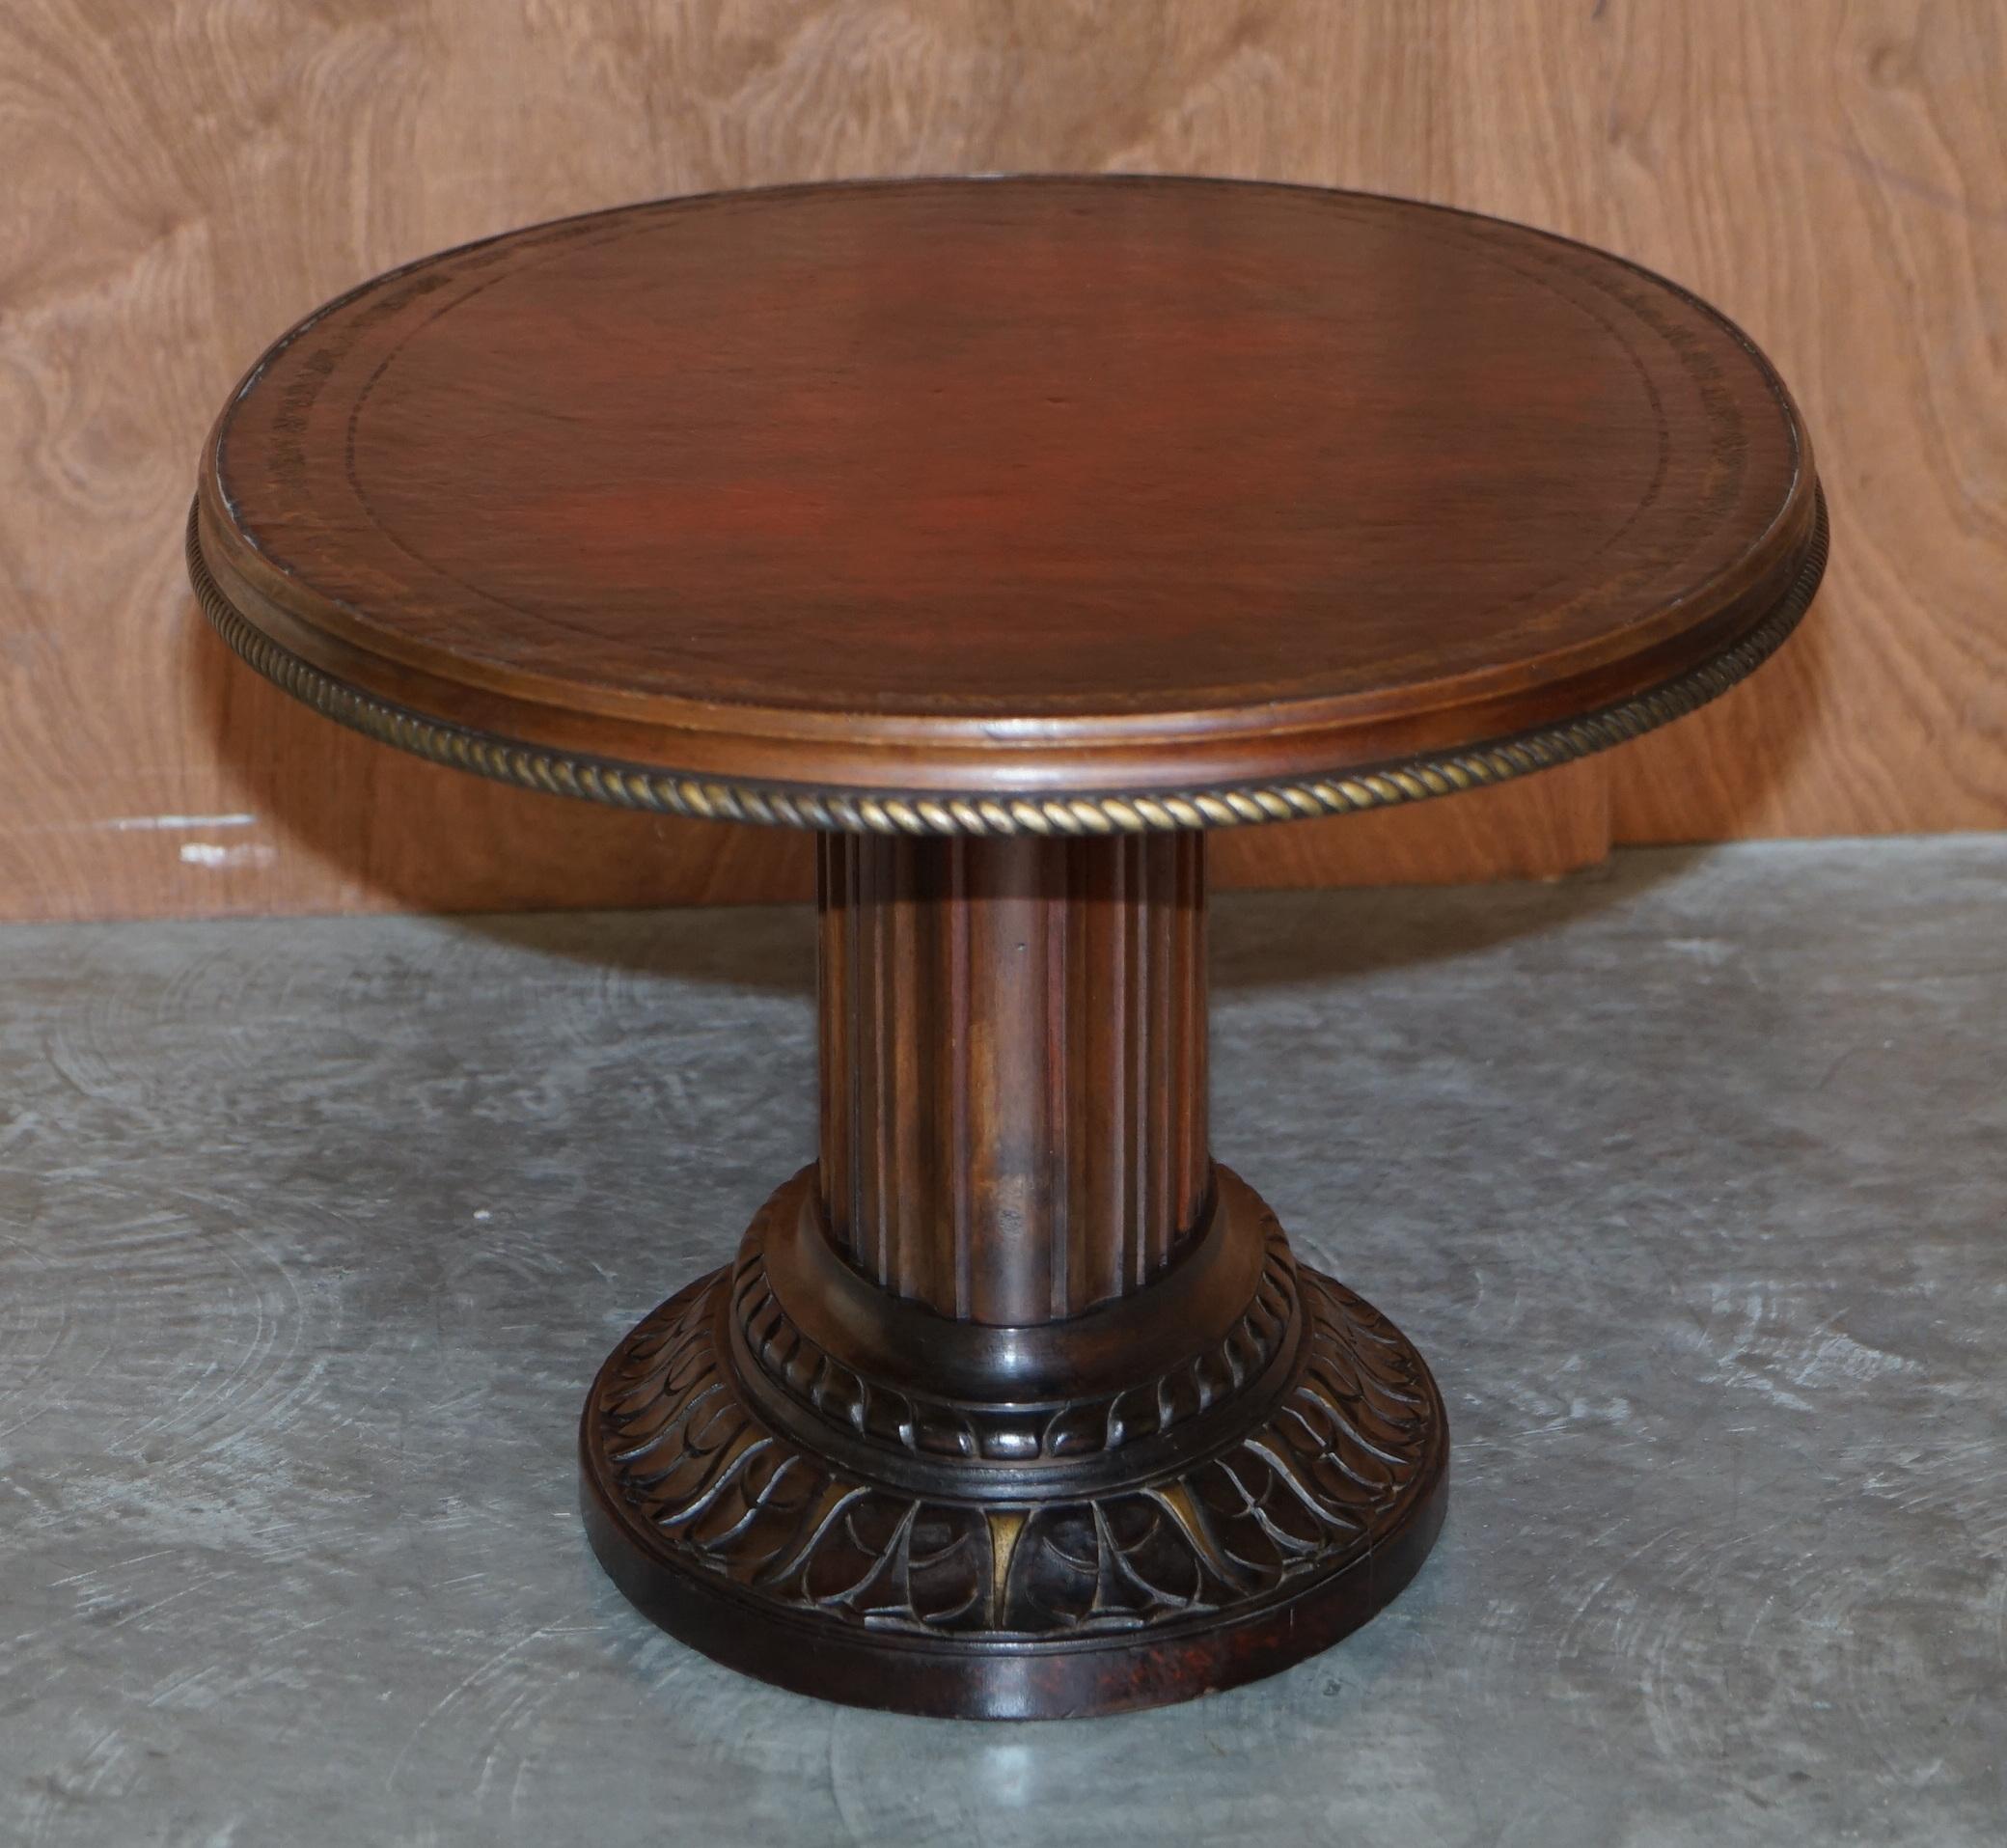 Oxblood Leather Oval Roman Pedestal Base Coffee or Cocktail Table Nice Find 4